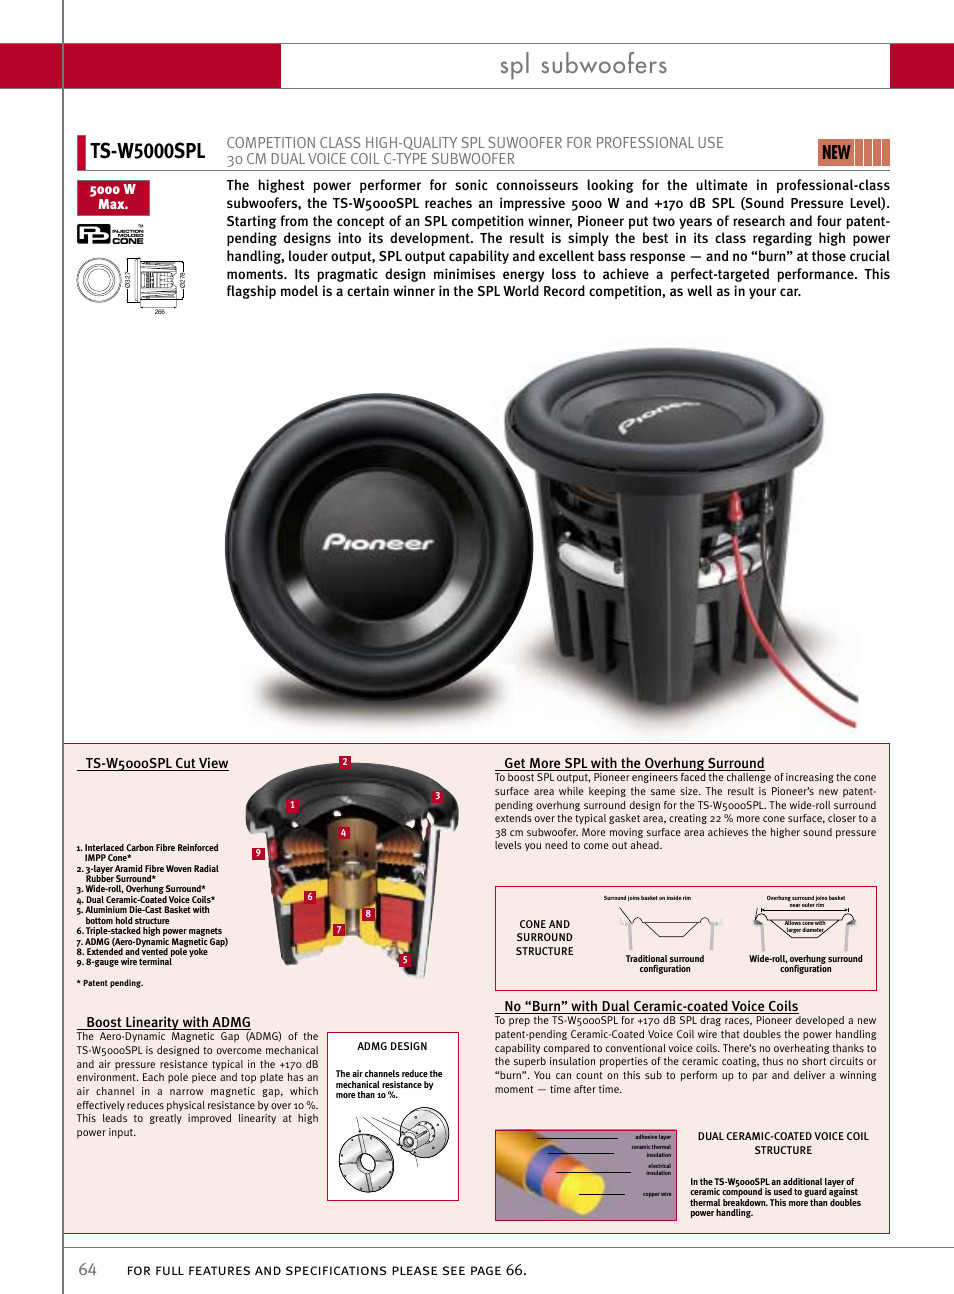 Spl subwoofers, Ts-w5000spl | Pioneer Reference Series DEX-P9R User Manual  | Page 14 / 52